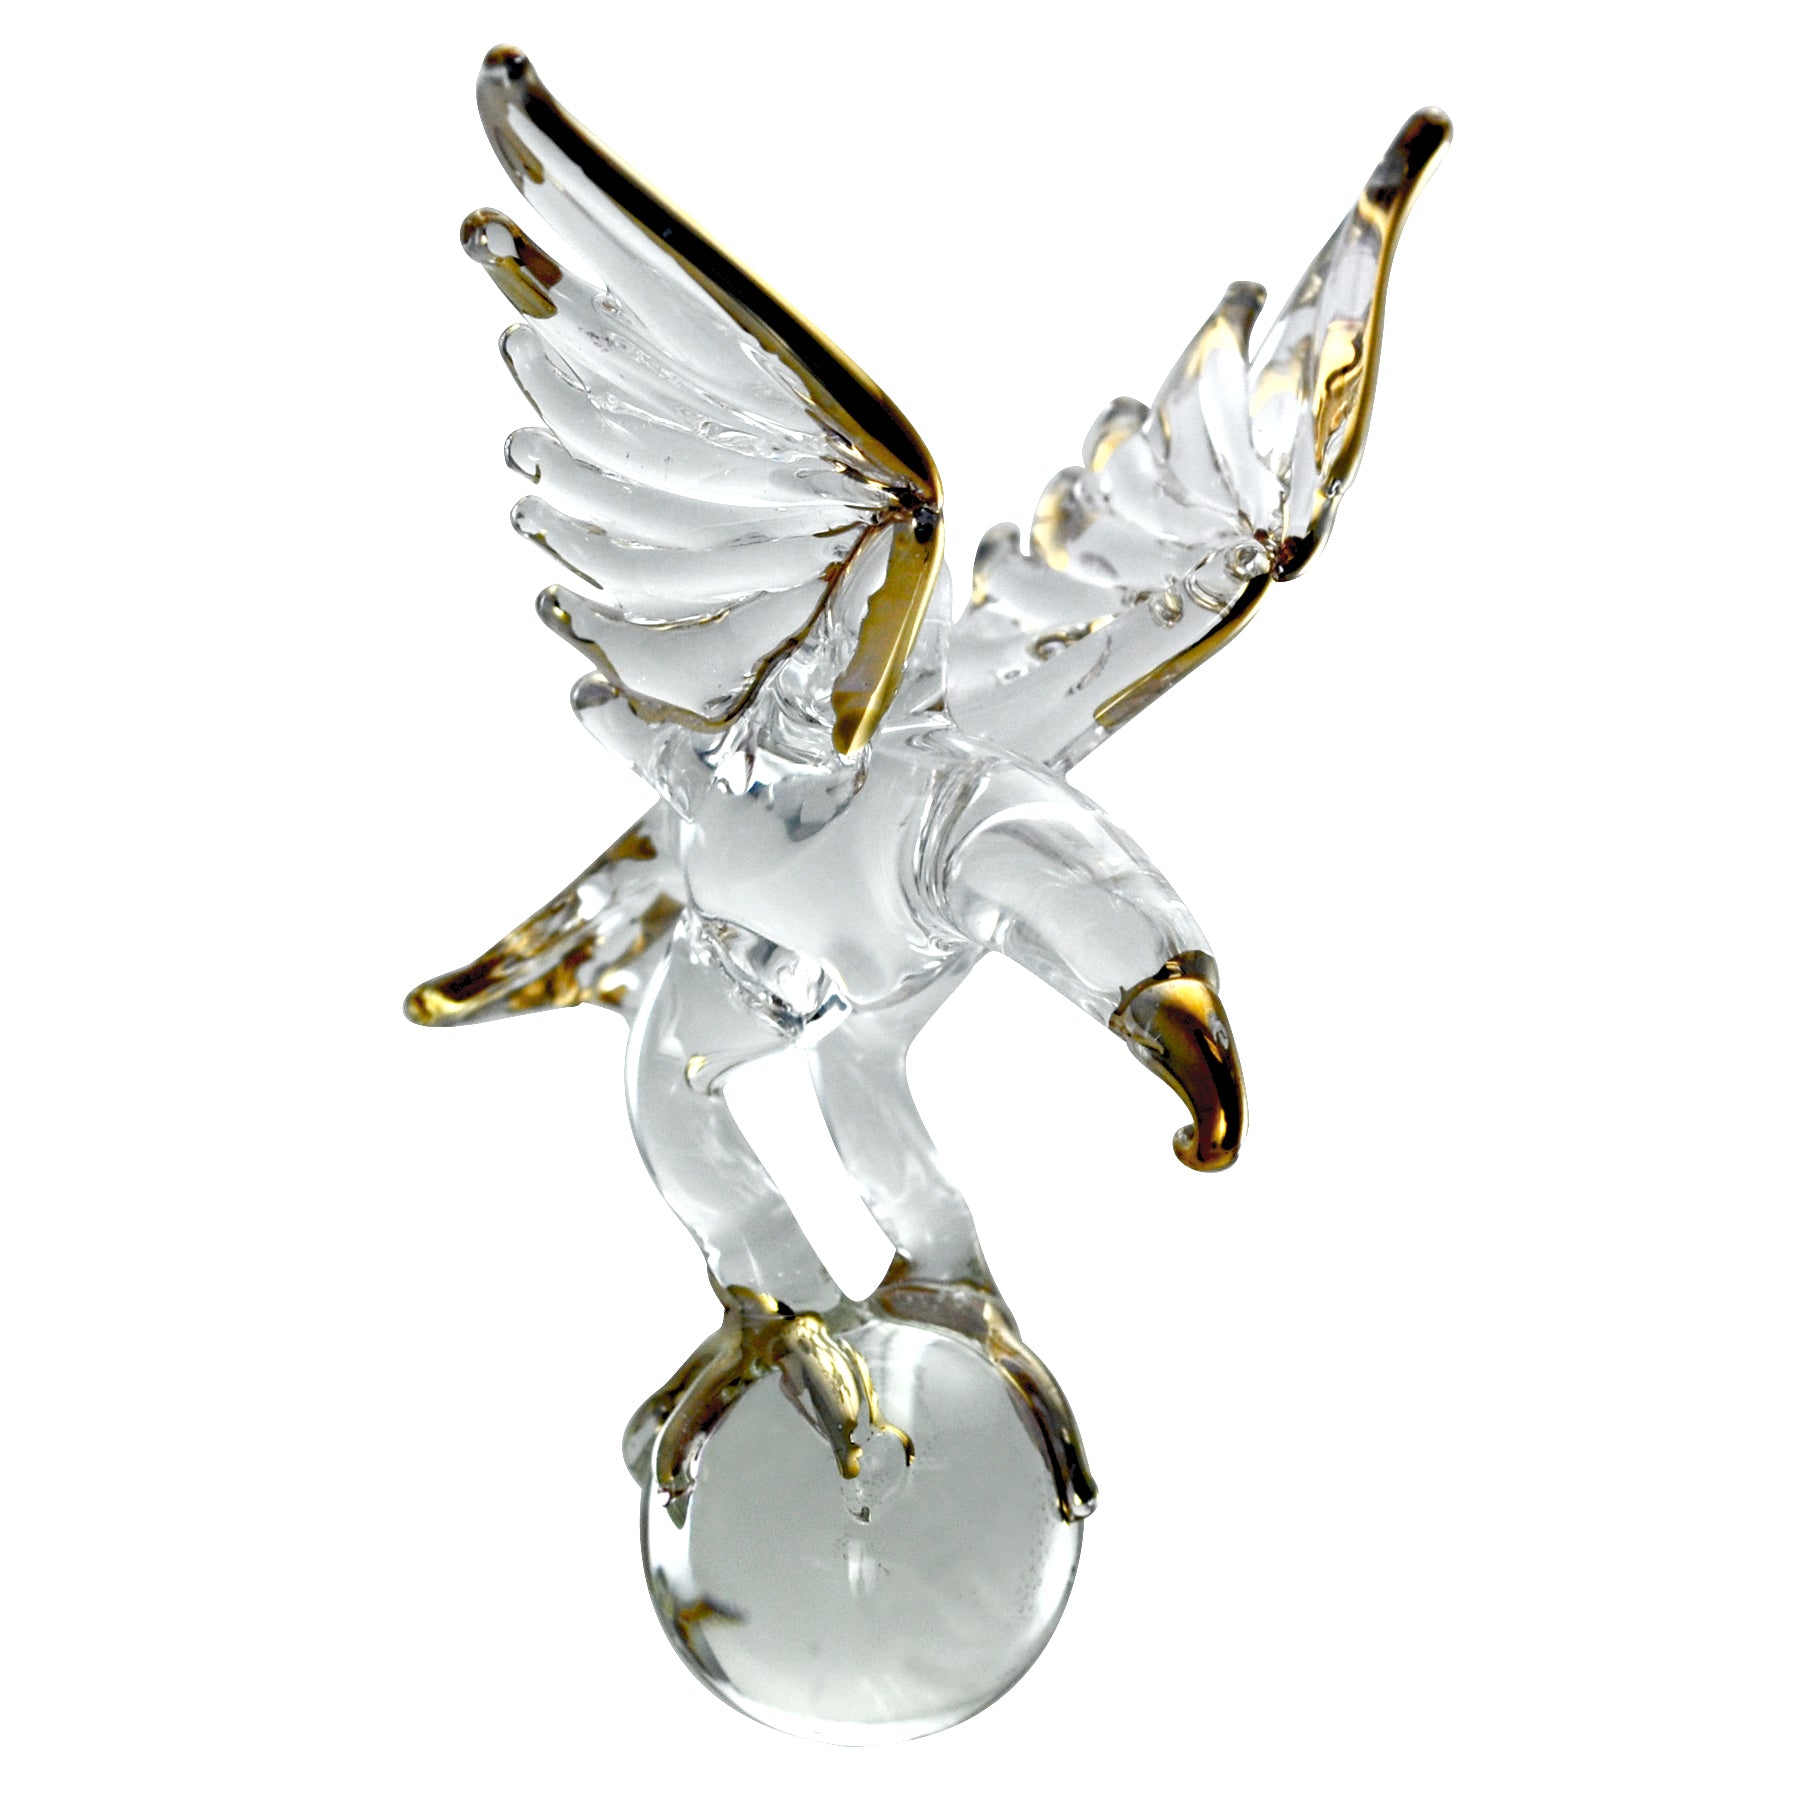 Crystal Castle Glass Eagle with gold trim details on beak, wings and tail. on a crystal ball. Front Side View.